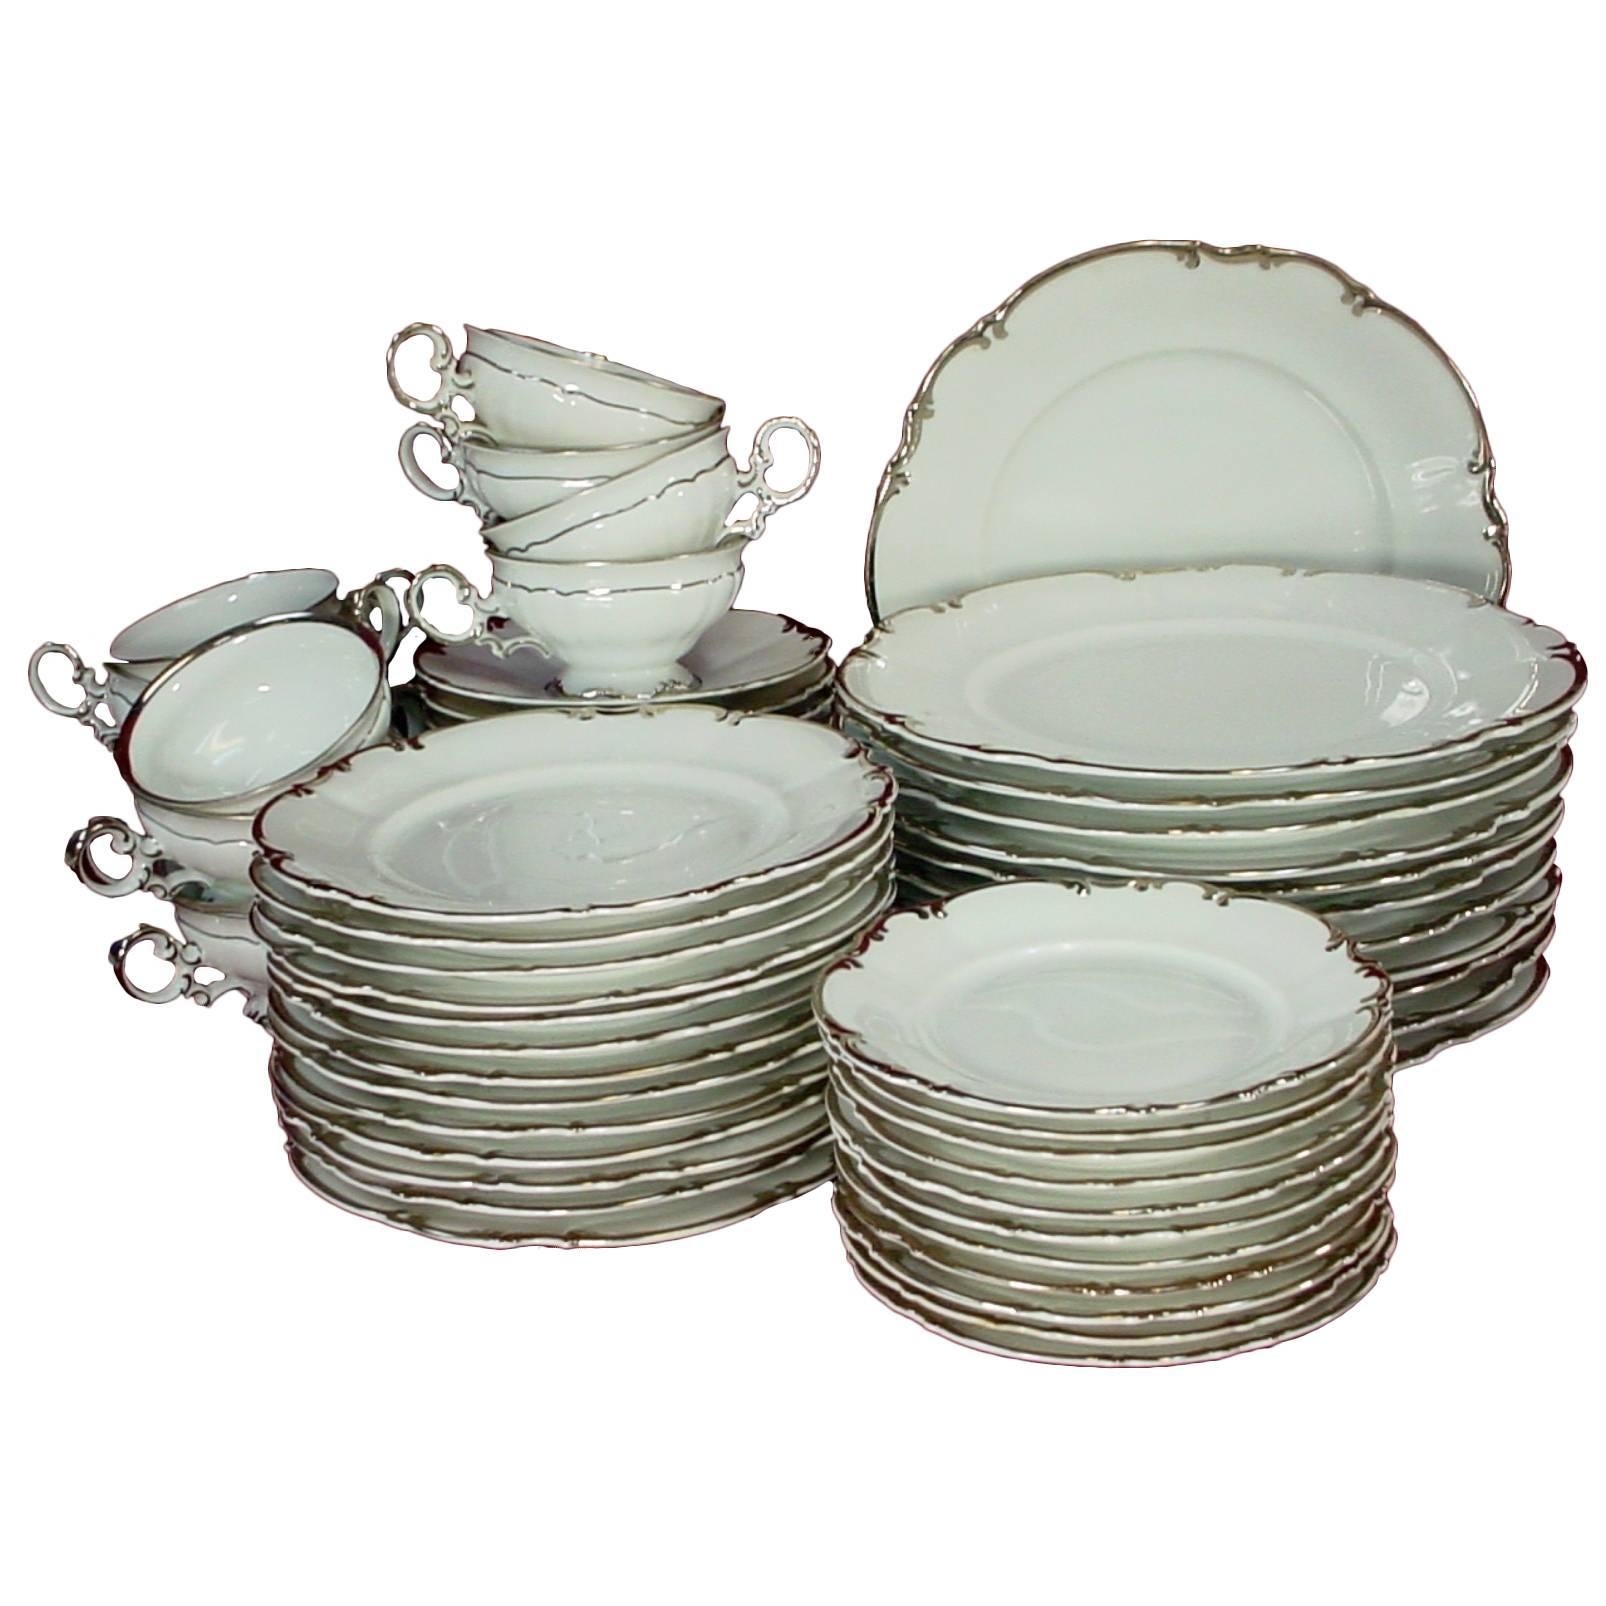 Hutschenreuther China Revere Pattern 60-Piece Set Service for 12